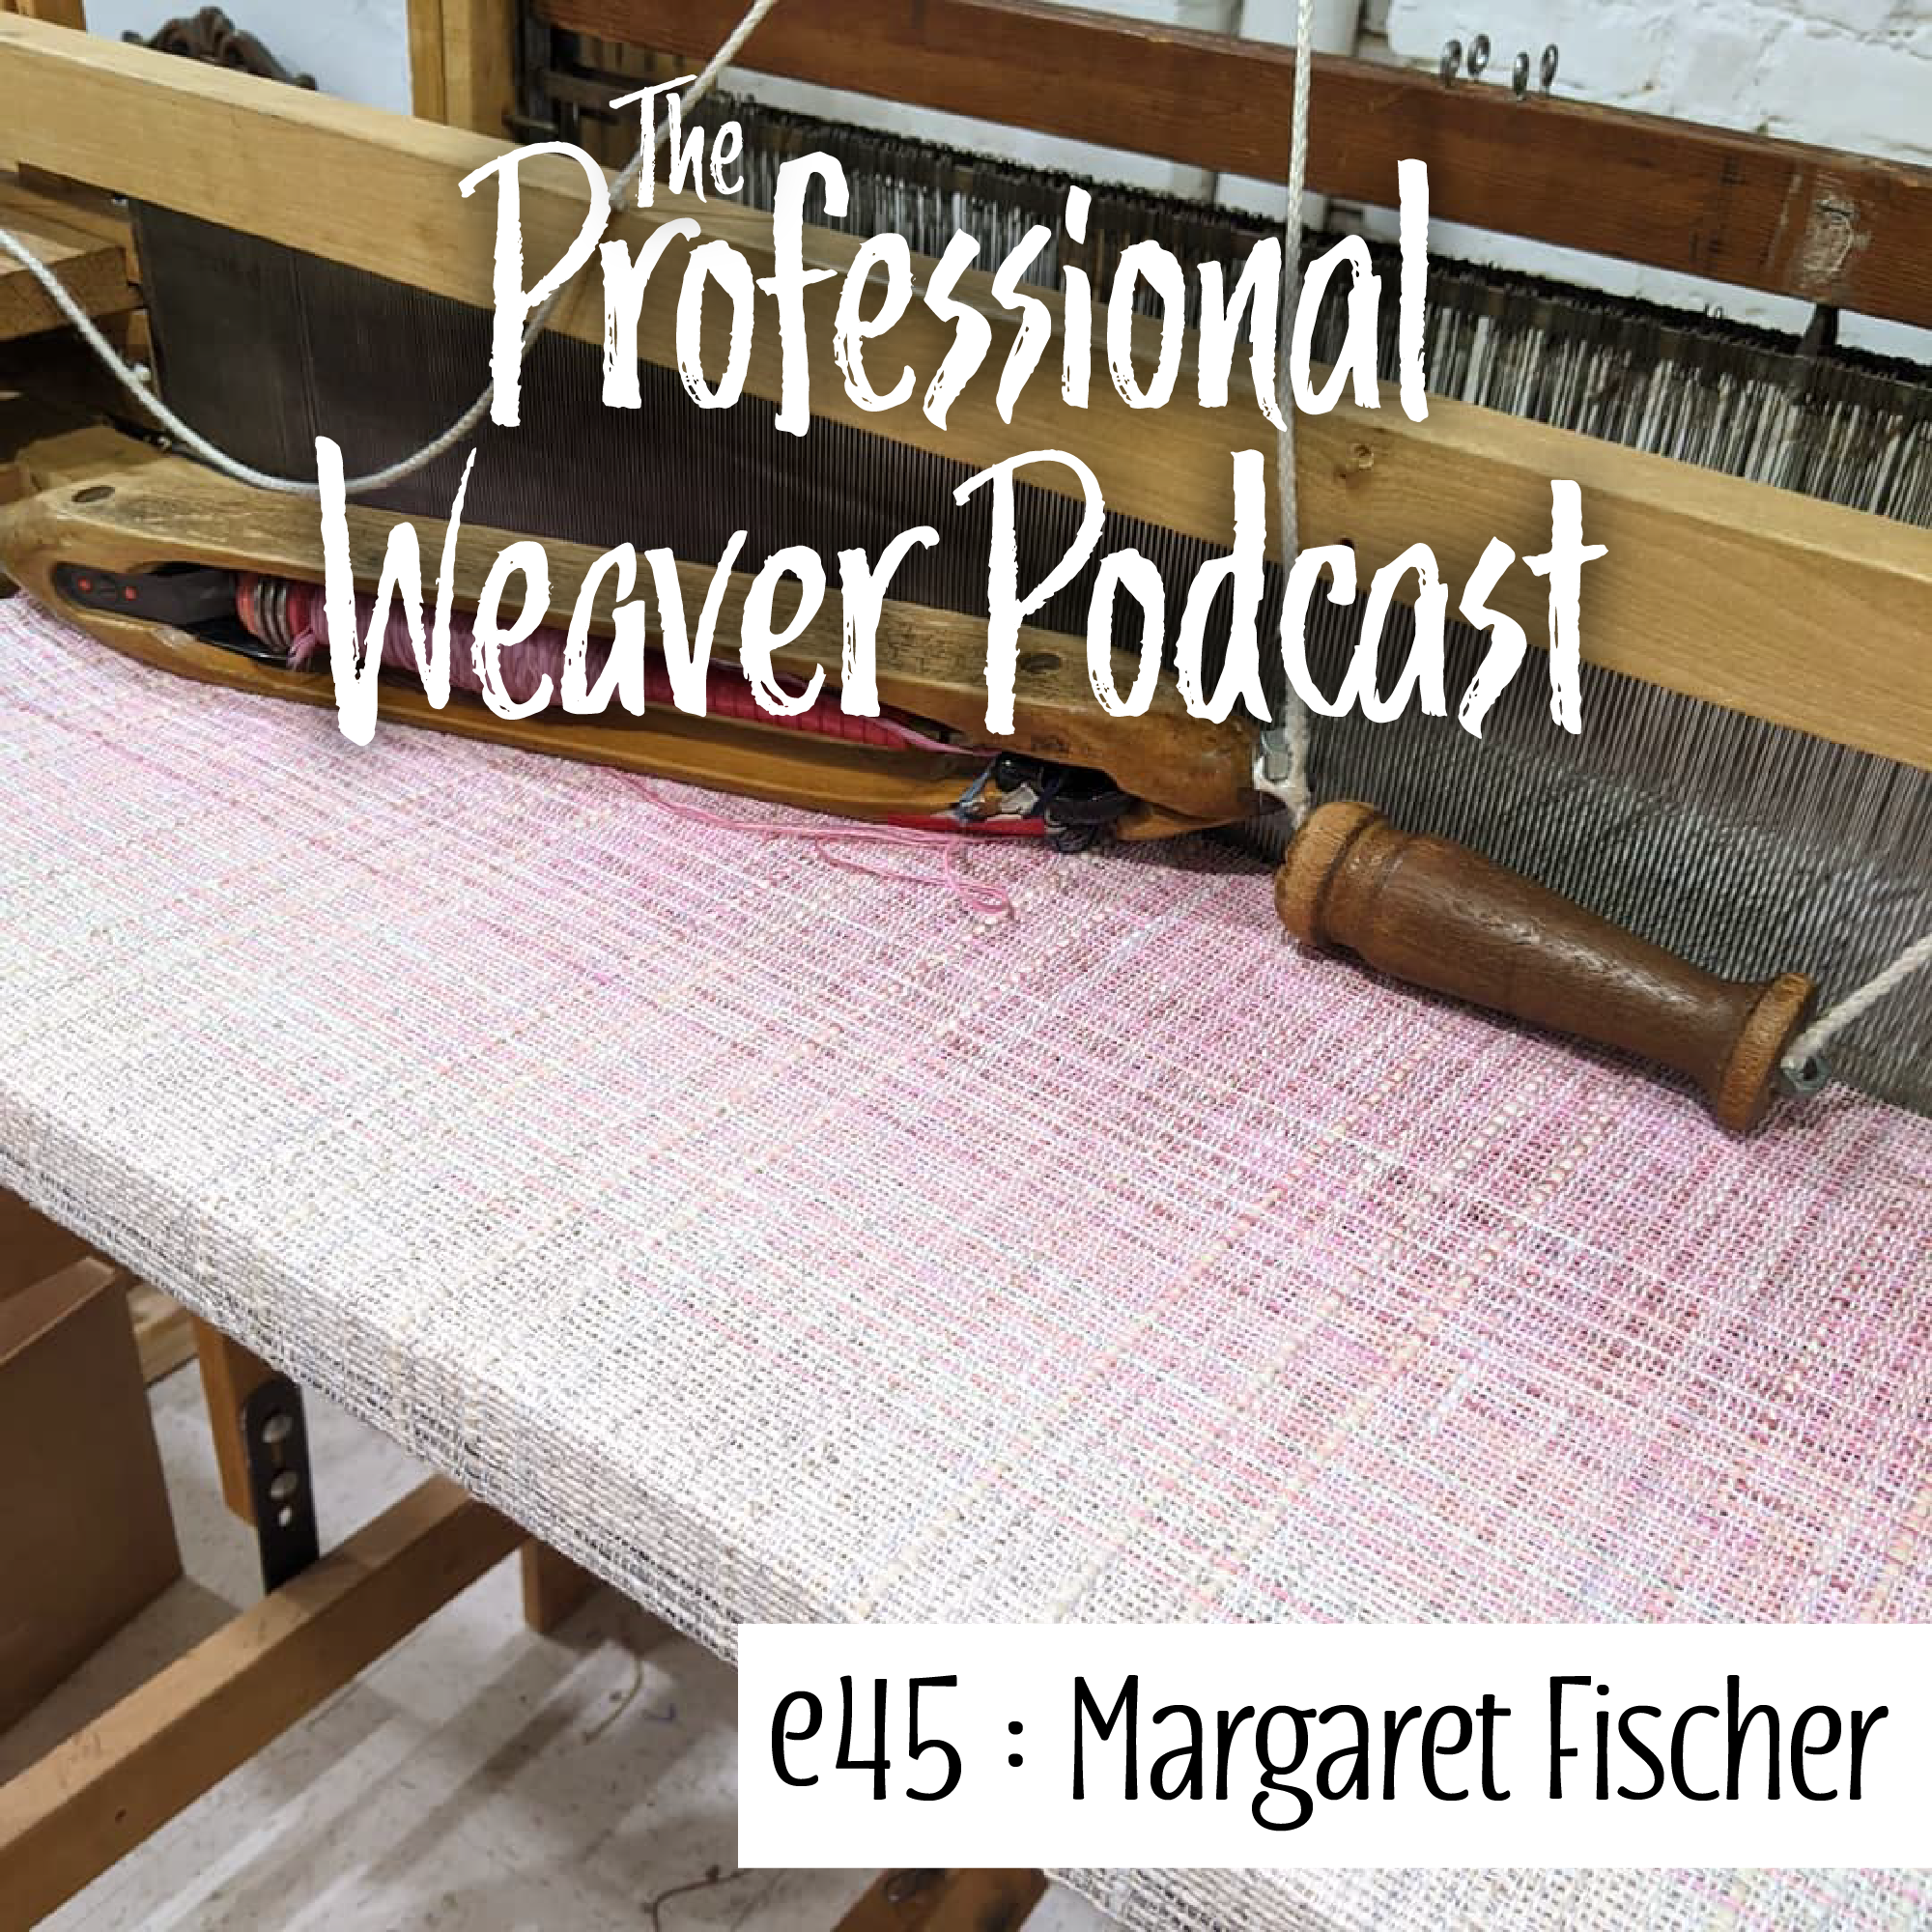 S2E15 : Margaret Fischer (Part 2) on how her business evolved, production weaving, and about making a career to support what you want out of life.